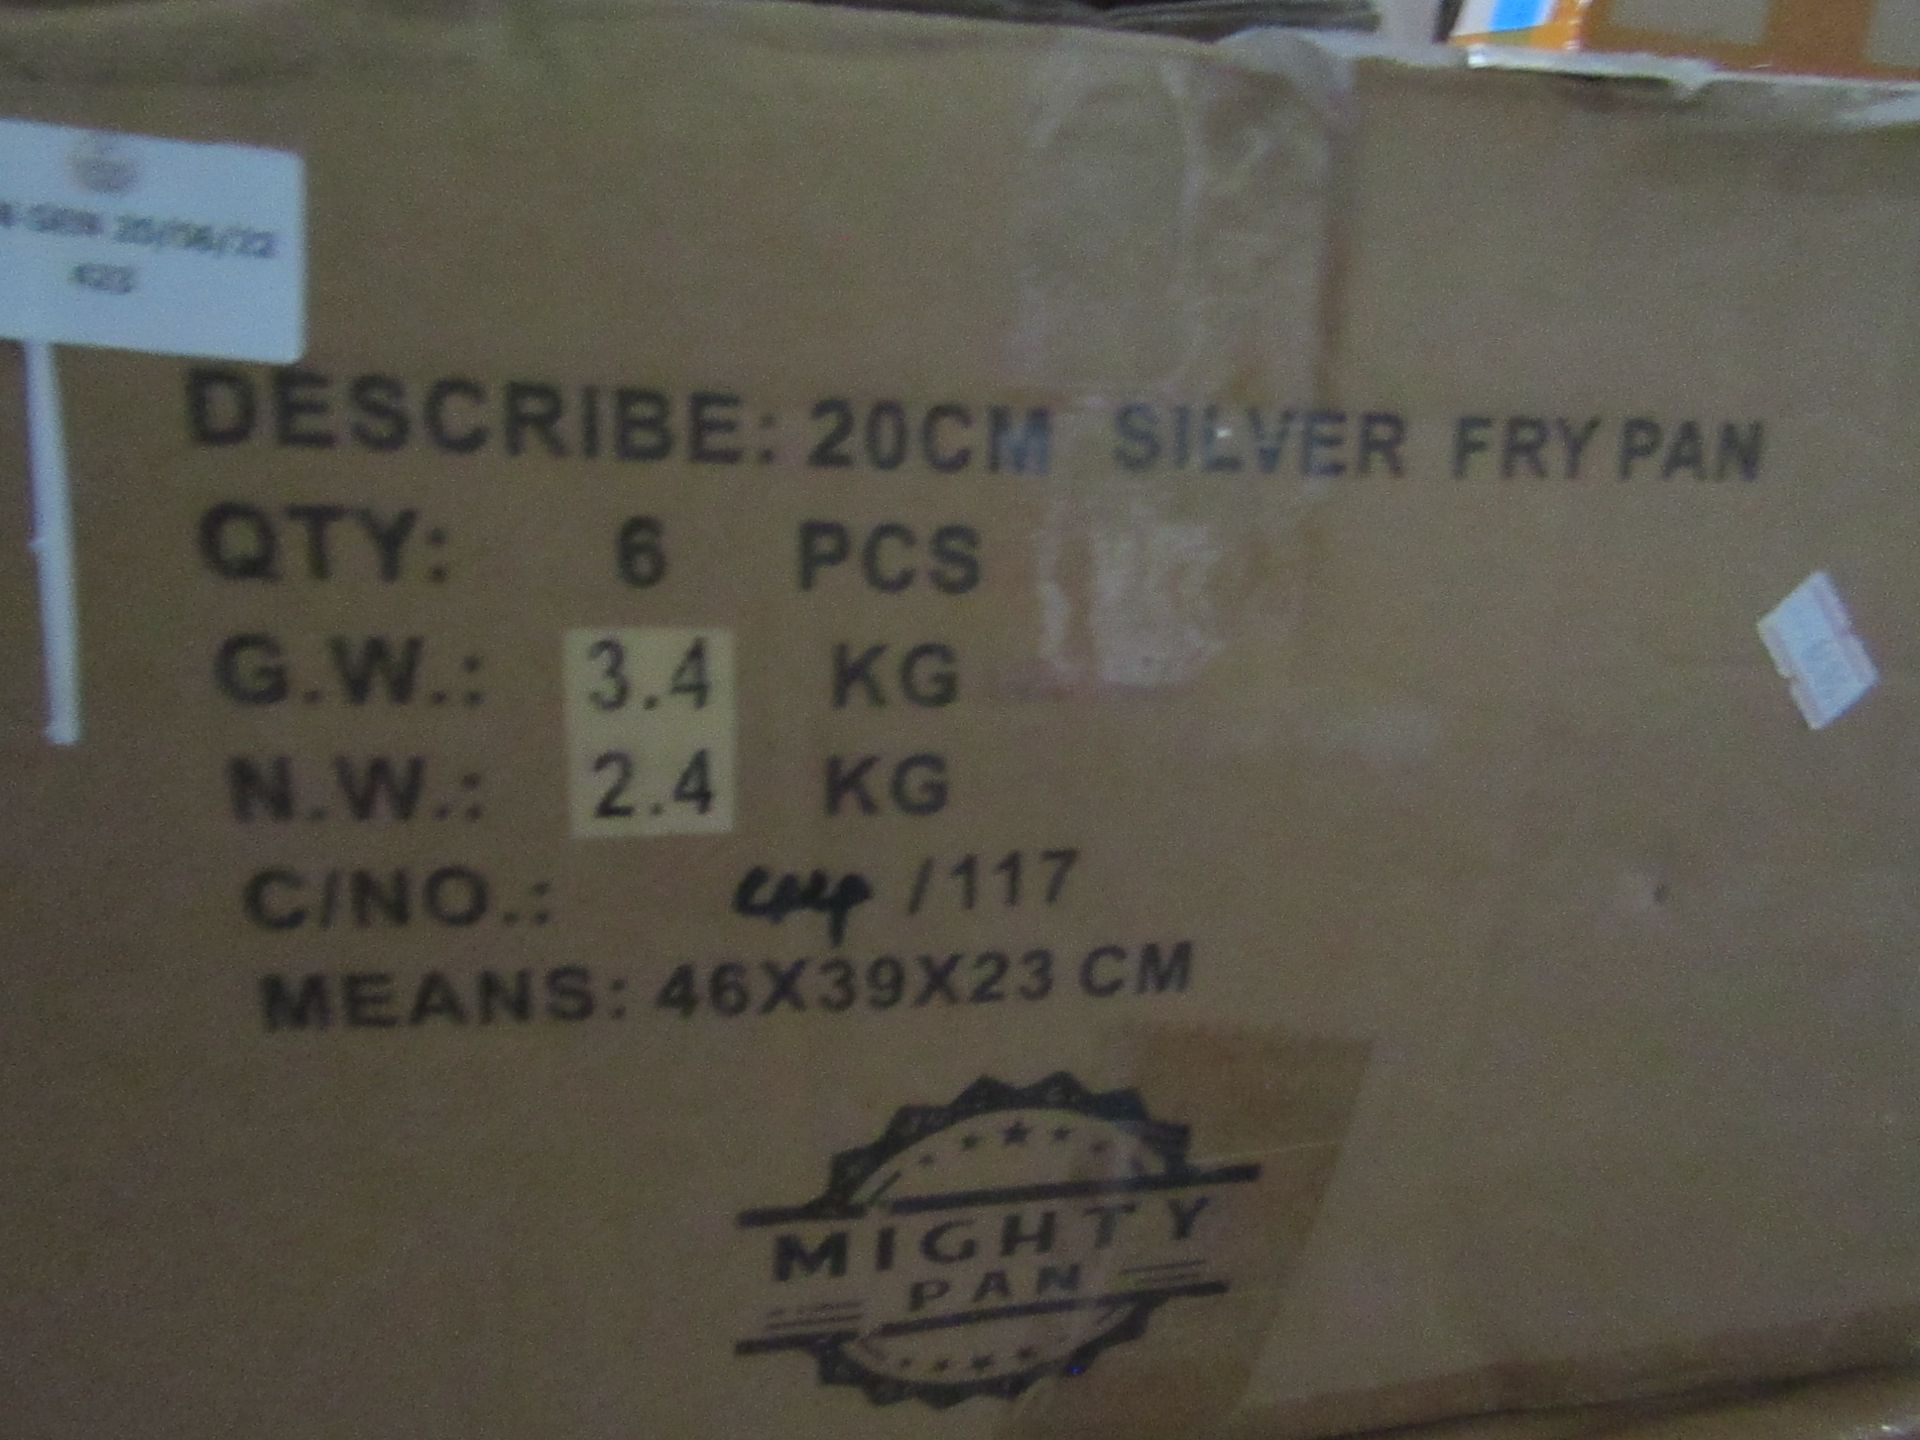 1x Box Containing 6-Pieces Being Mighty Pan - 20cm Silver Frying Pans - New & Boxed.